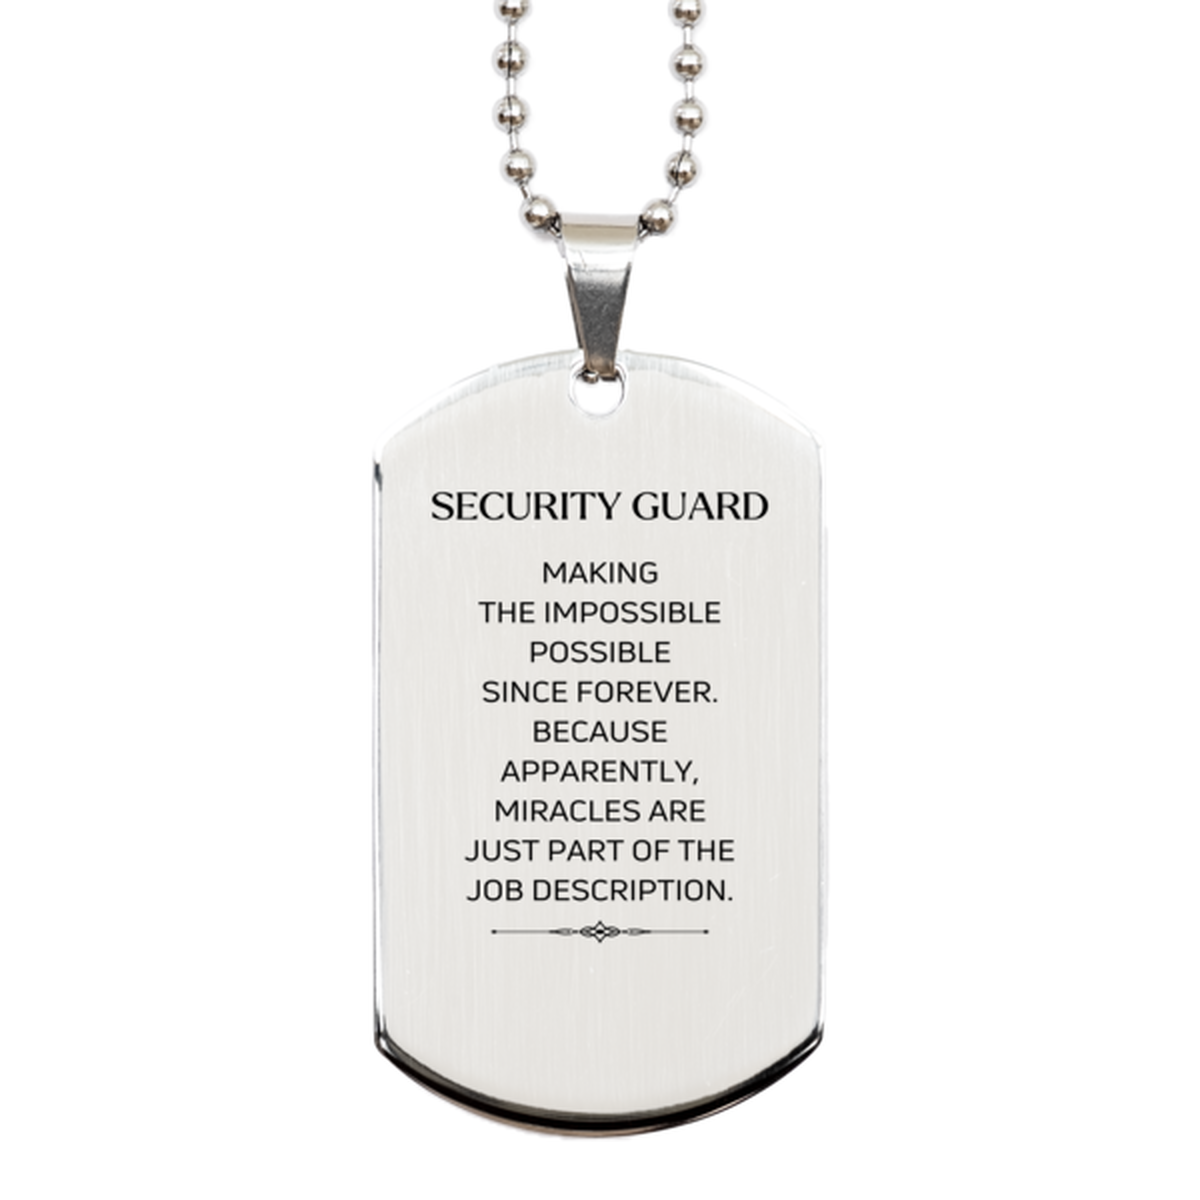 Funny Security Guard Gifts, Miracles are just part of the job description, Inspirational Birthday Silver Dog Tag For Security Guard, Men, Women, Coworkers, Friends, Boss